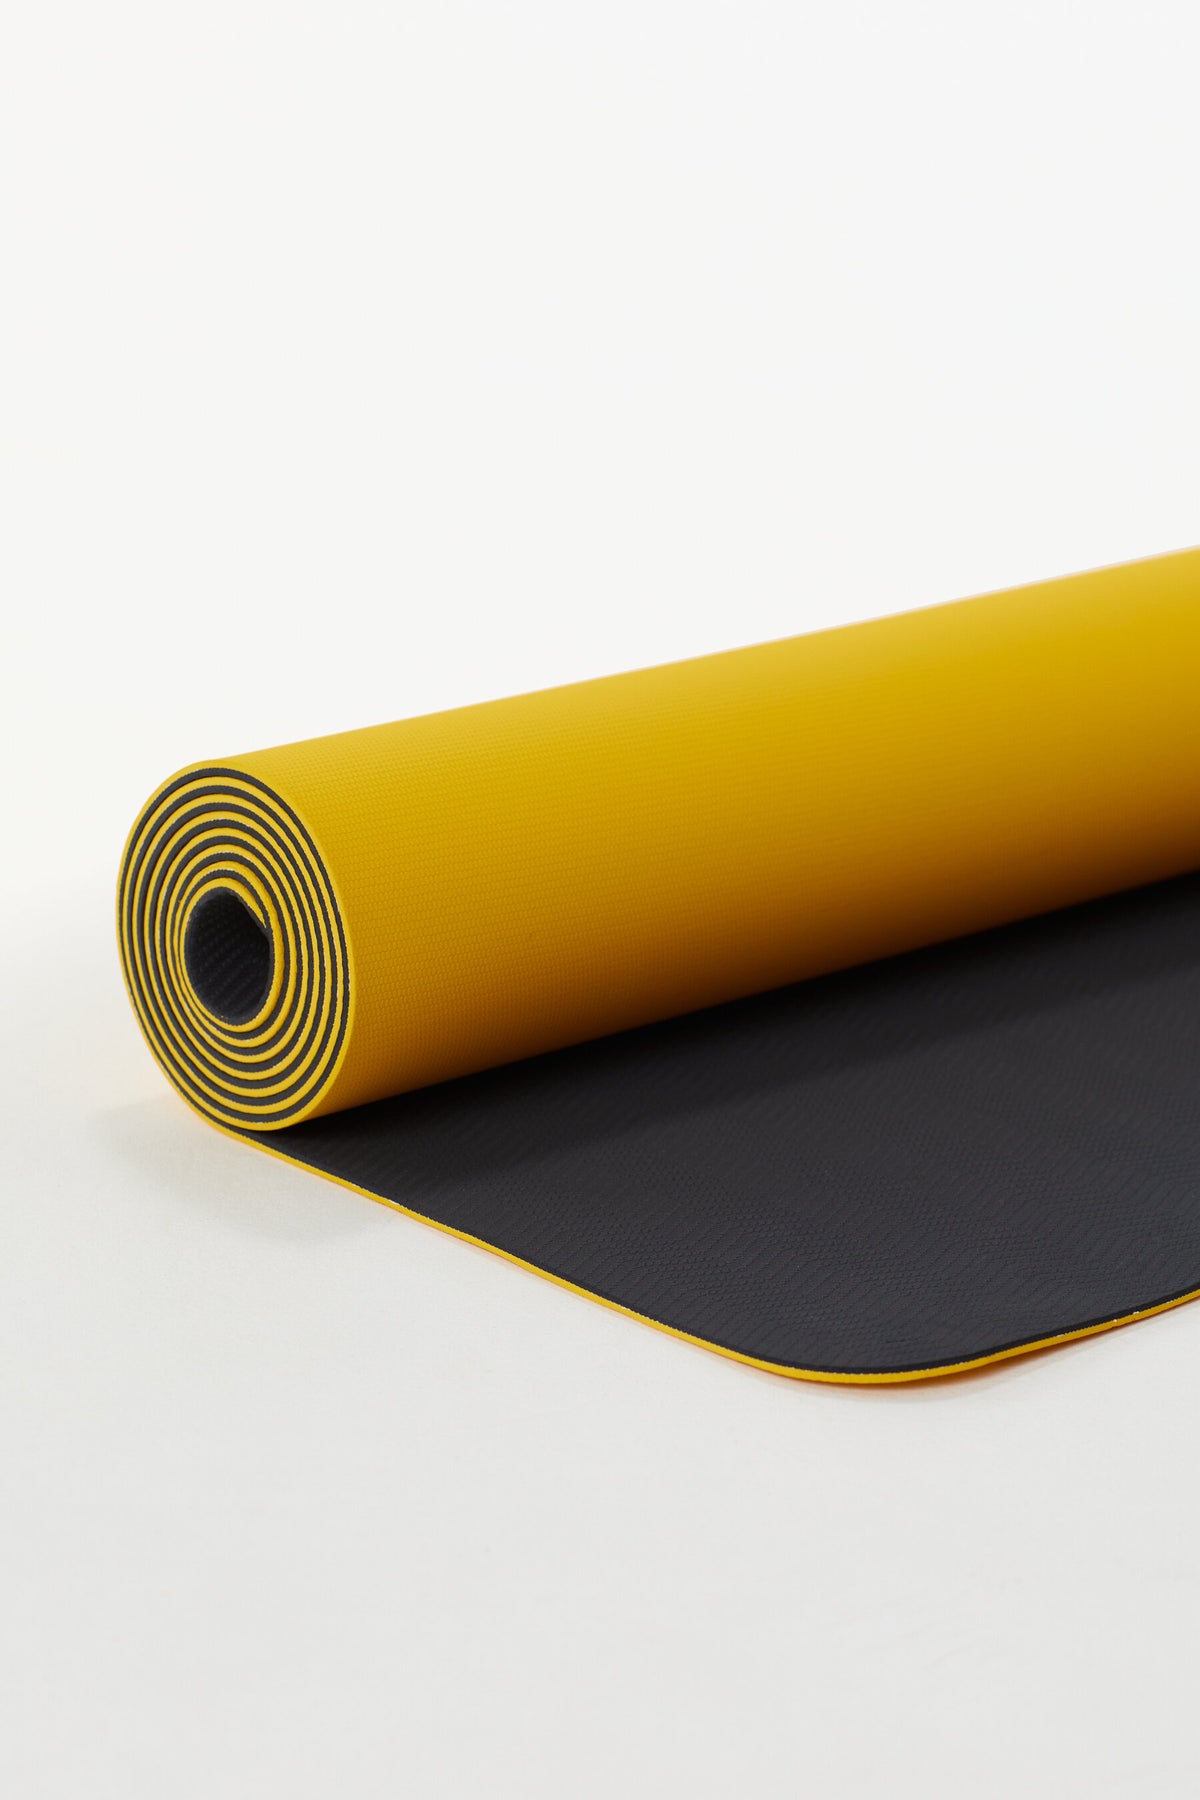 Lolë Yoga Mat - Body By You - Your Life - Your Body - Your Fitness